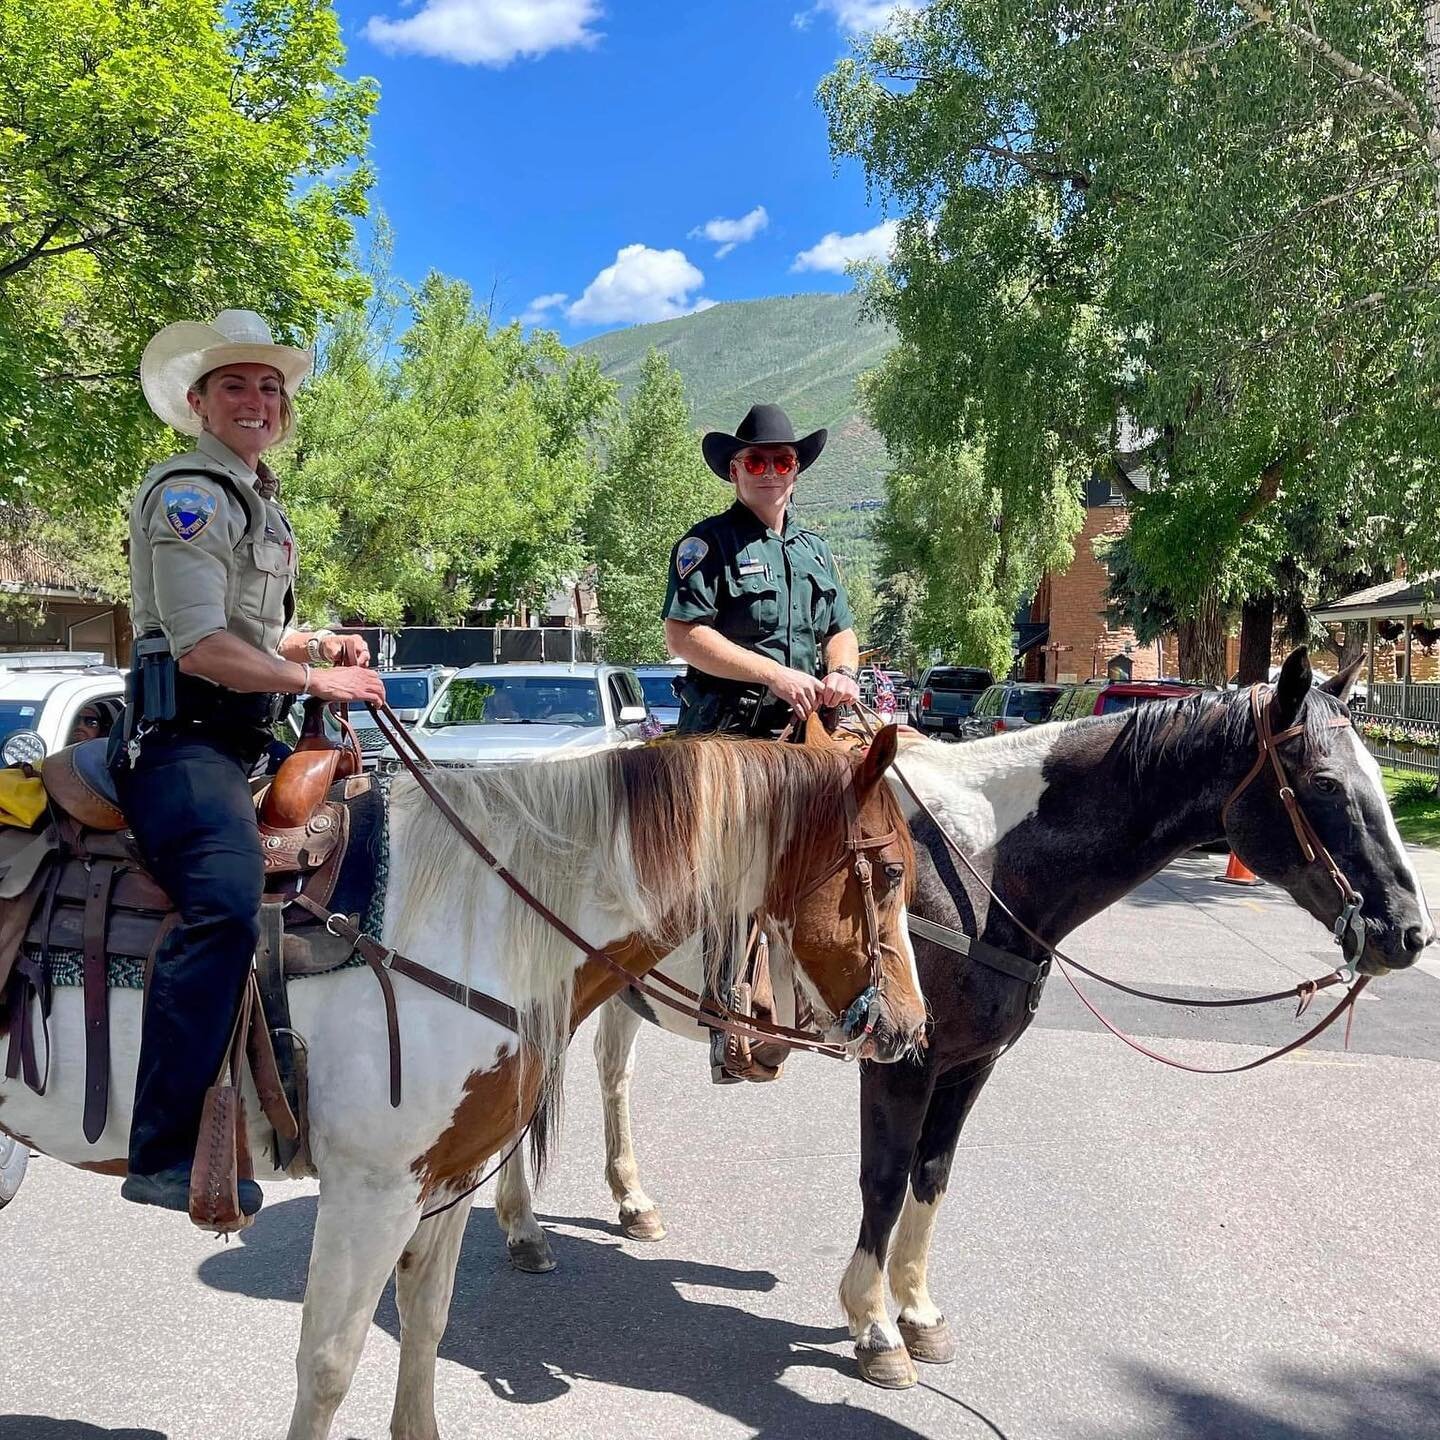 Anybody recognize these familiar faces? 

Keeping @pitkinsheriff safe since 2022! 🇺🇸 We may have to make our parade return and join them next year&hellip;

#aspen #aspenco #keepingthewestwild #pitkinsheriff #mounteddeputies